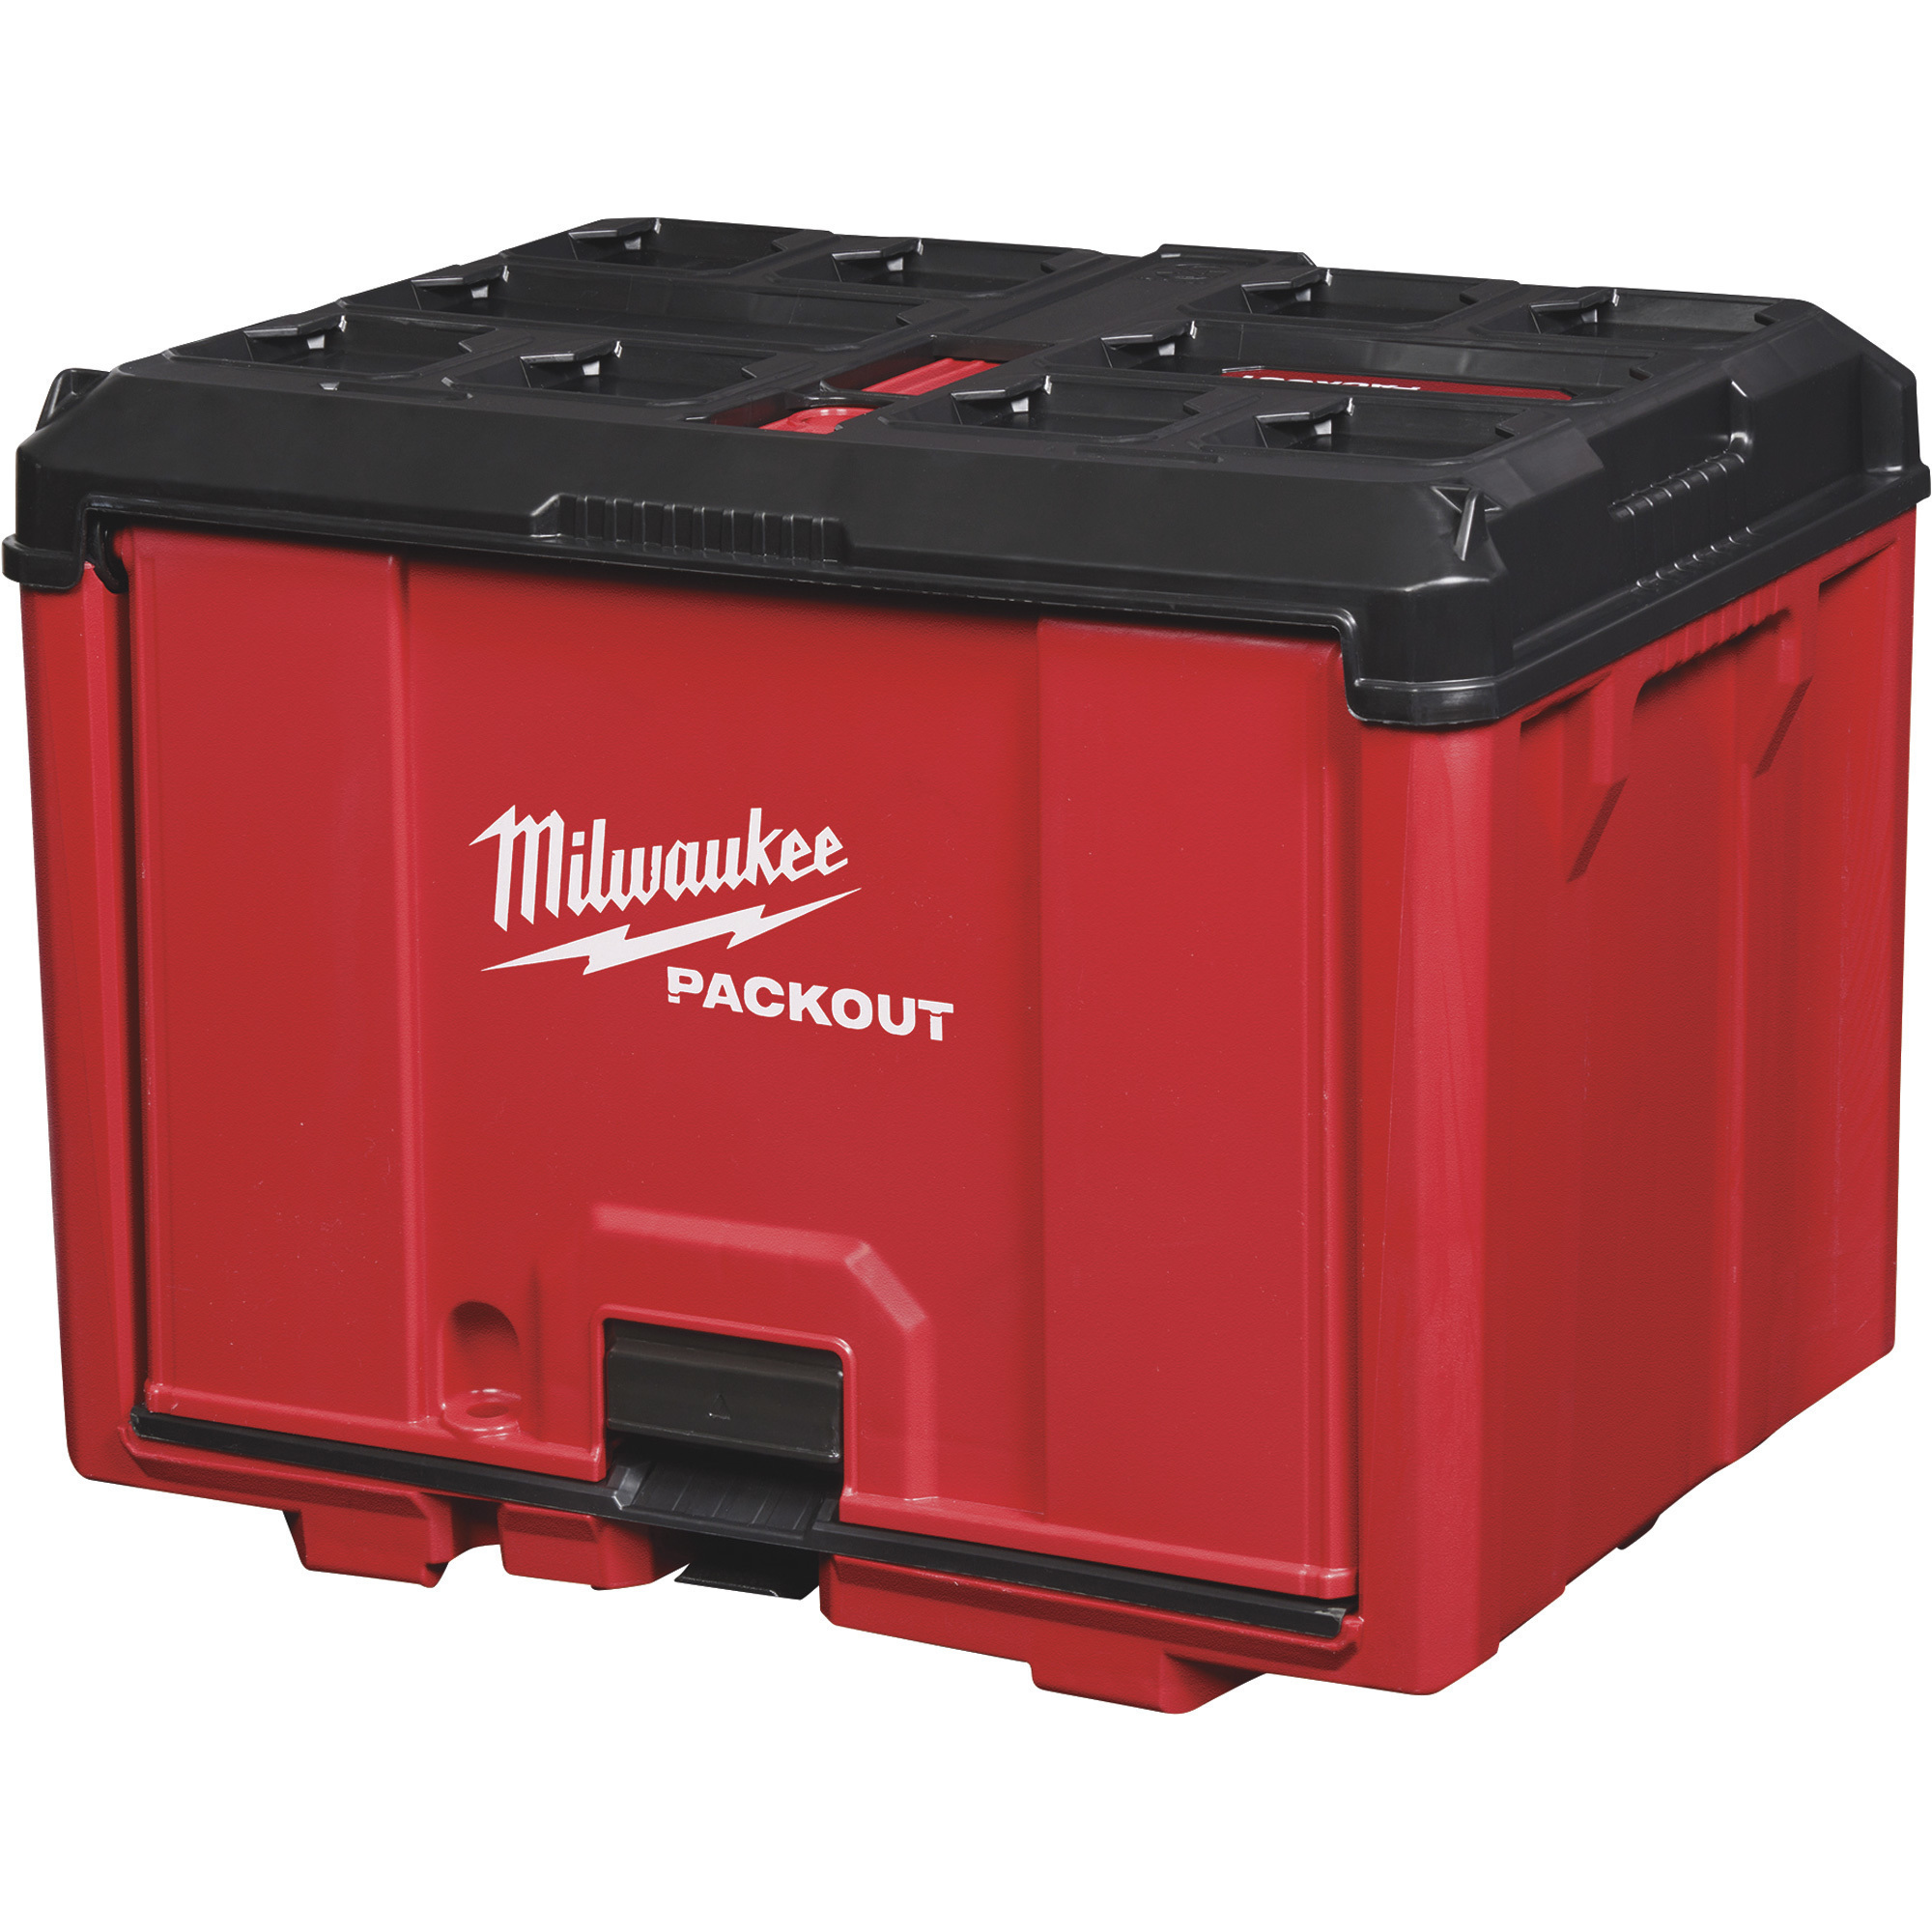 Milwaukee Packout Cabinet, Model 48-22-8445